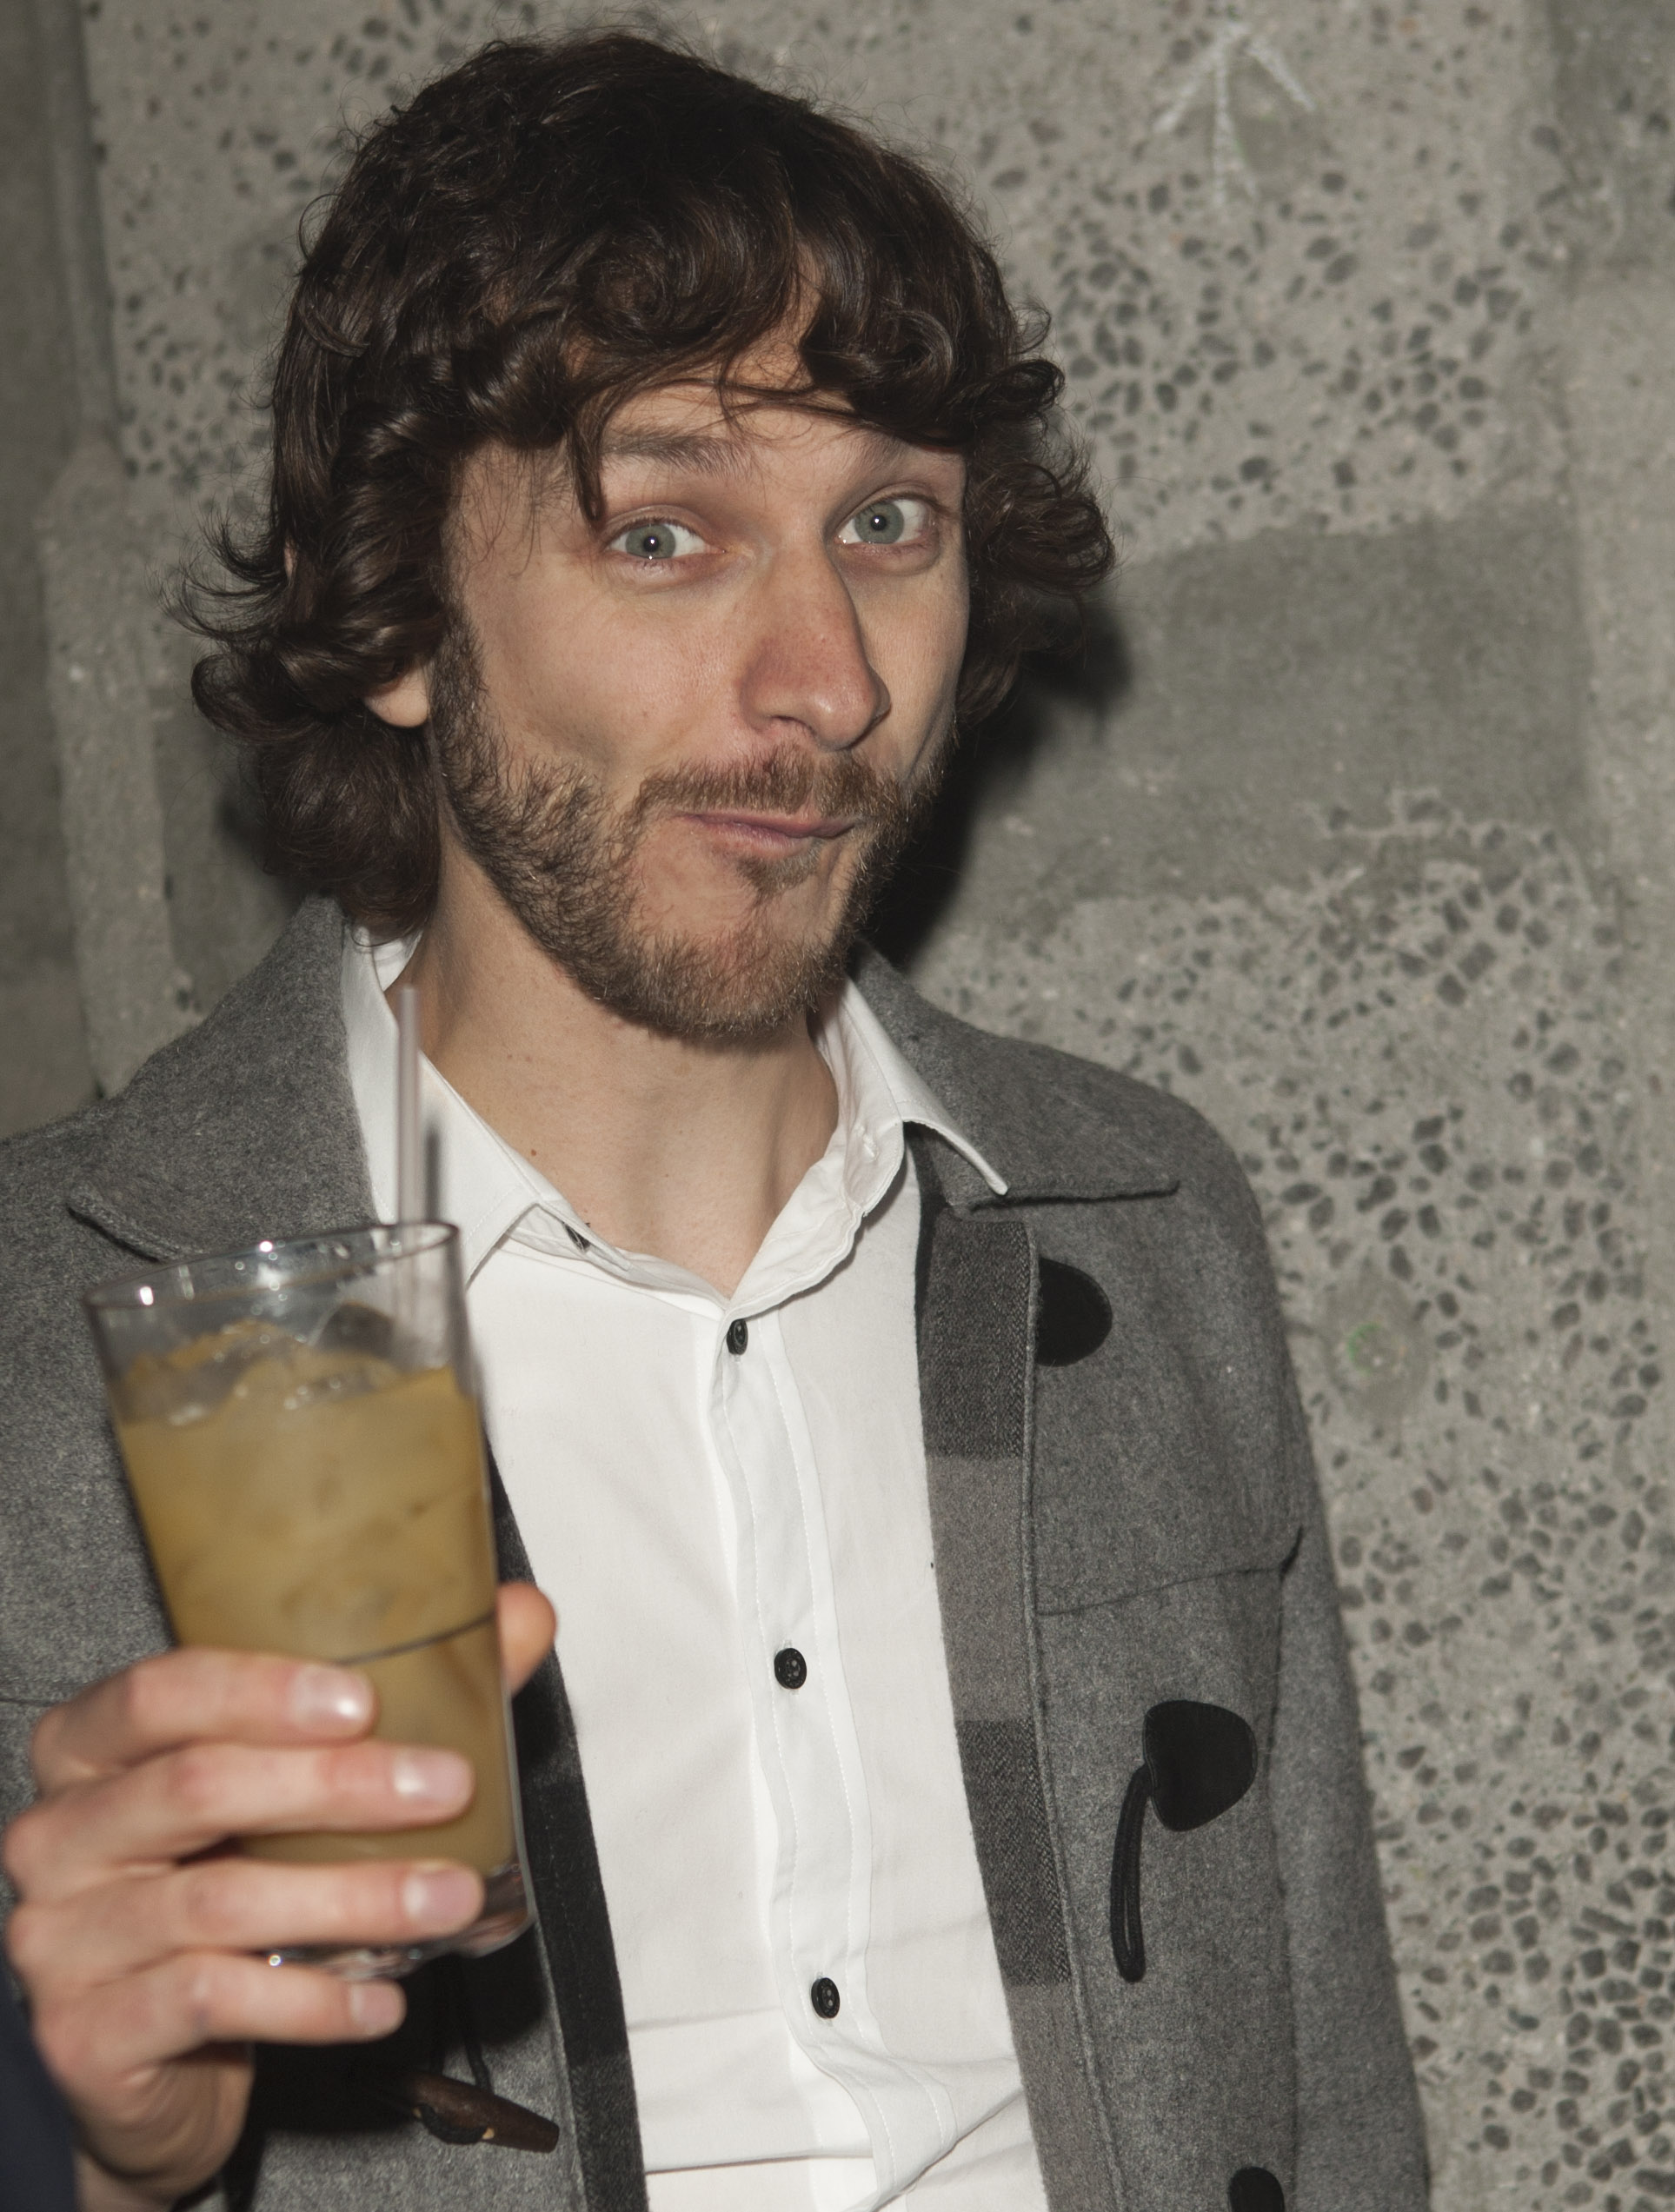 HOLLYWOOD, CA - FEBRUARY 10:  Recording Artist Gotye attends Republic Records Post Grammy Party at The Emerson Theatre on February 10, 2013 in Hollywood, California.  (Photo by Michael Bezjian/WireImage)